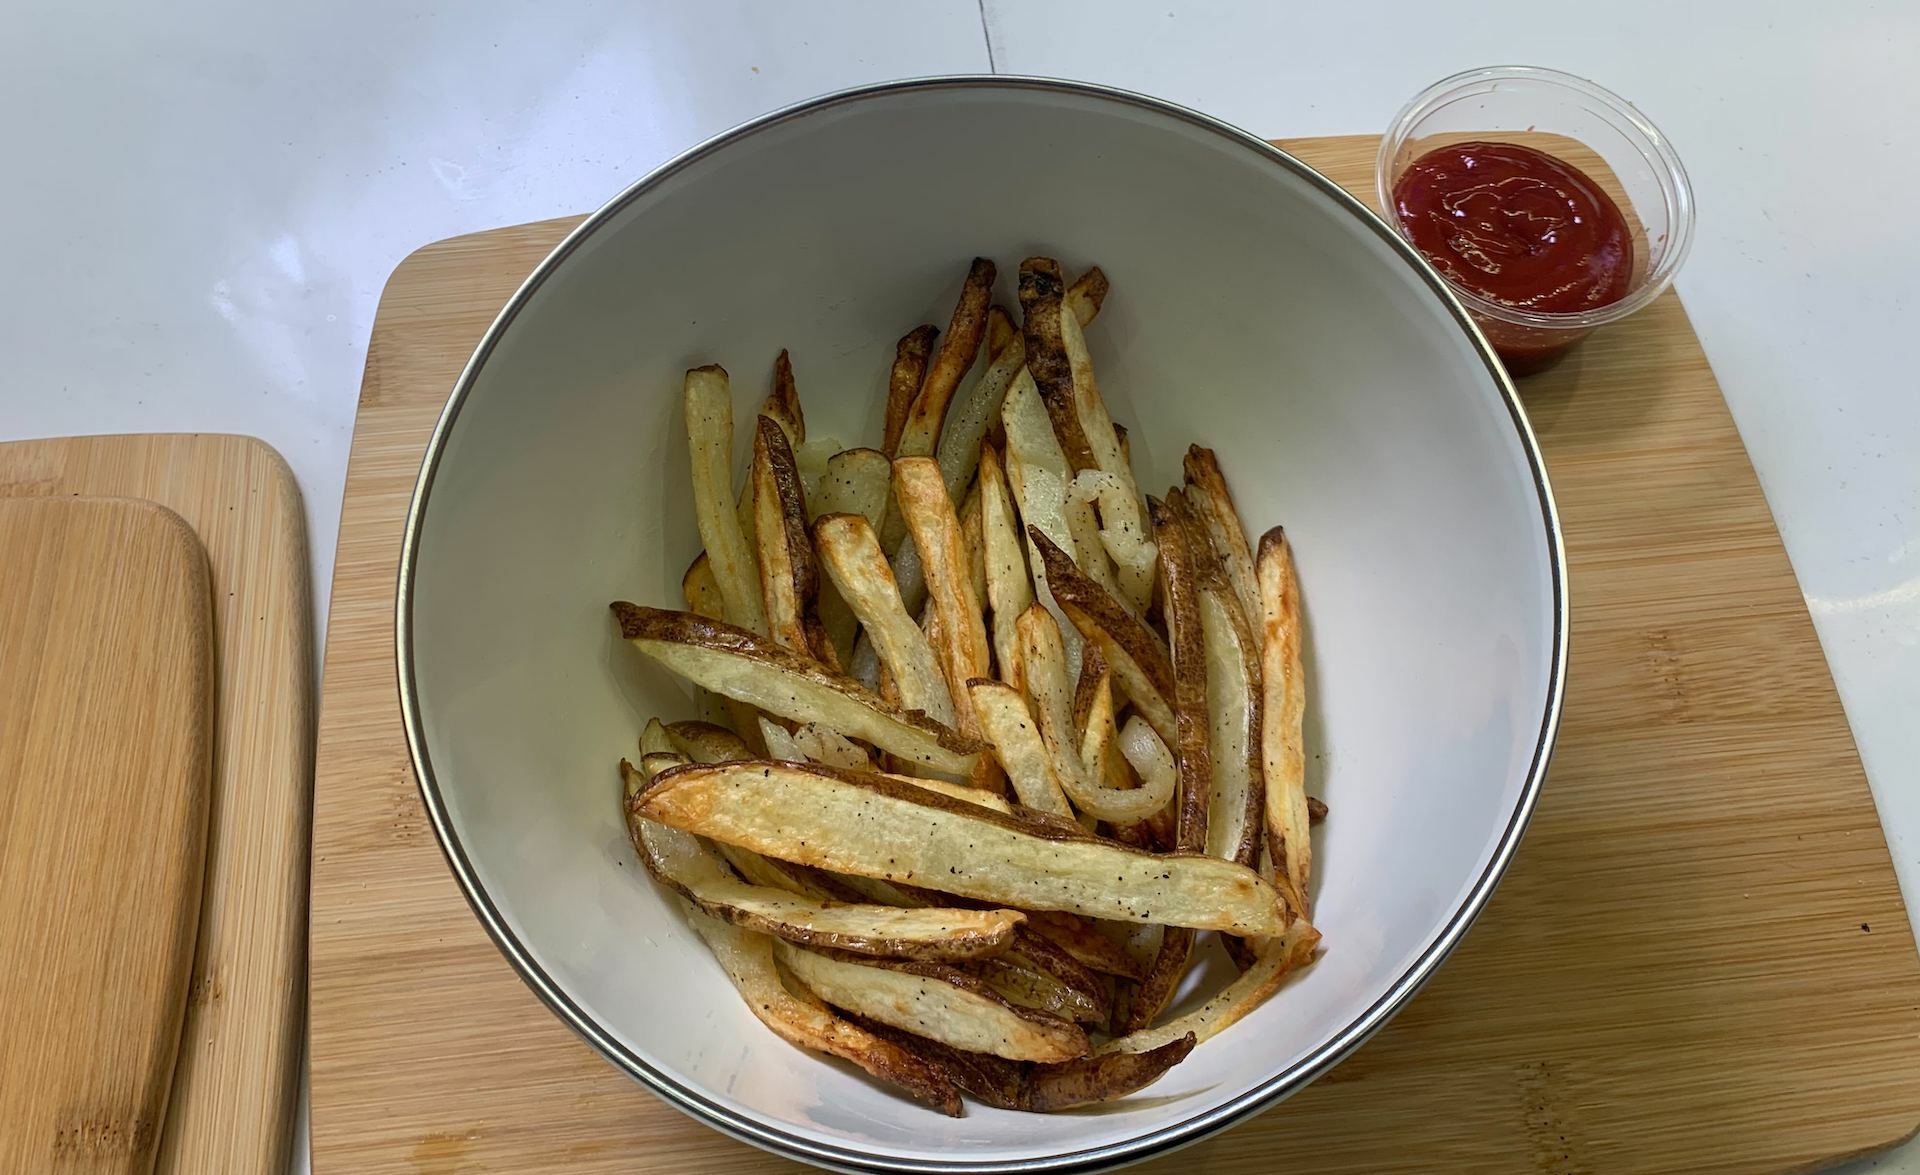 cooked fries in bowl with ketchup on side